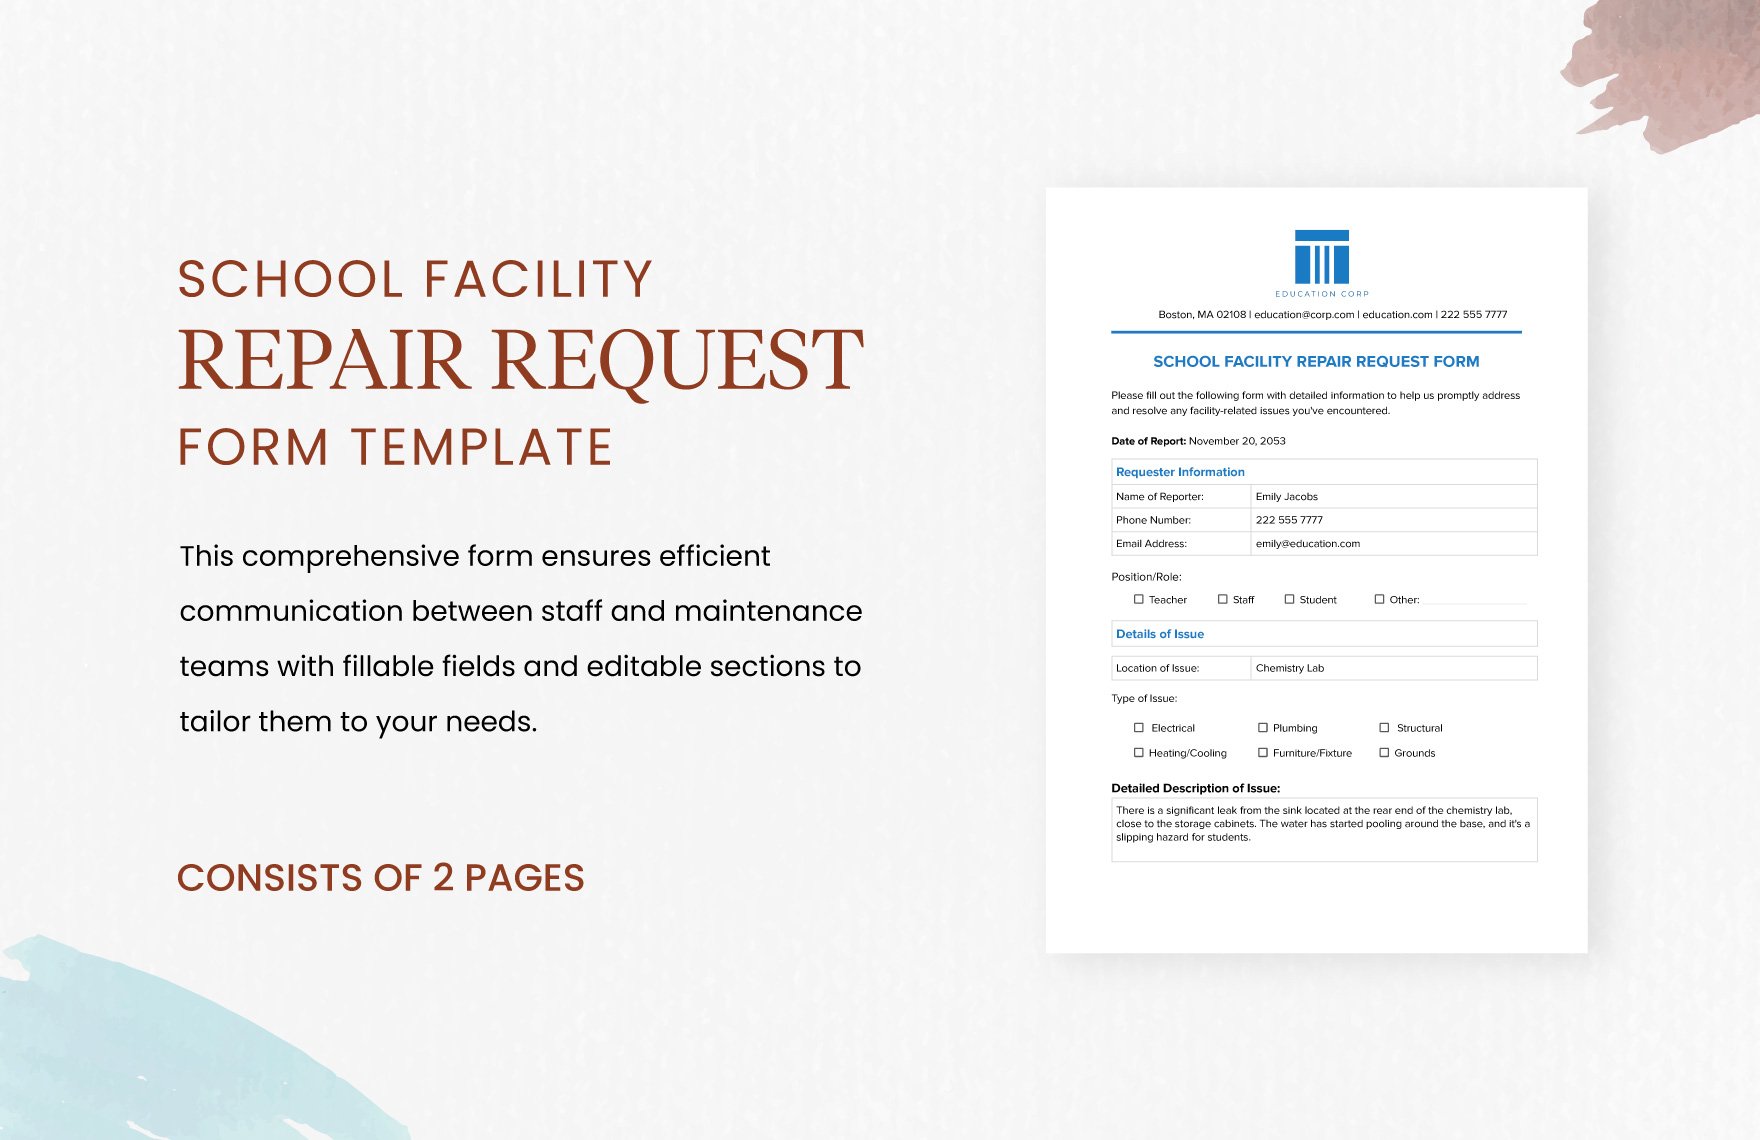 School Facility Repair Request Form Template